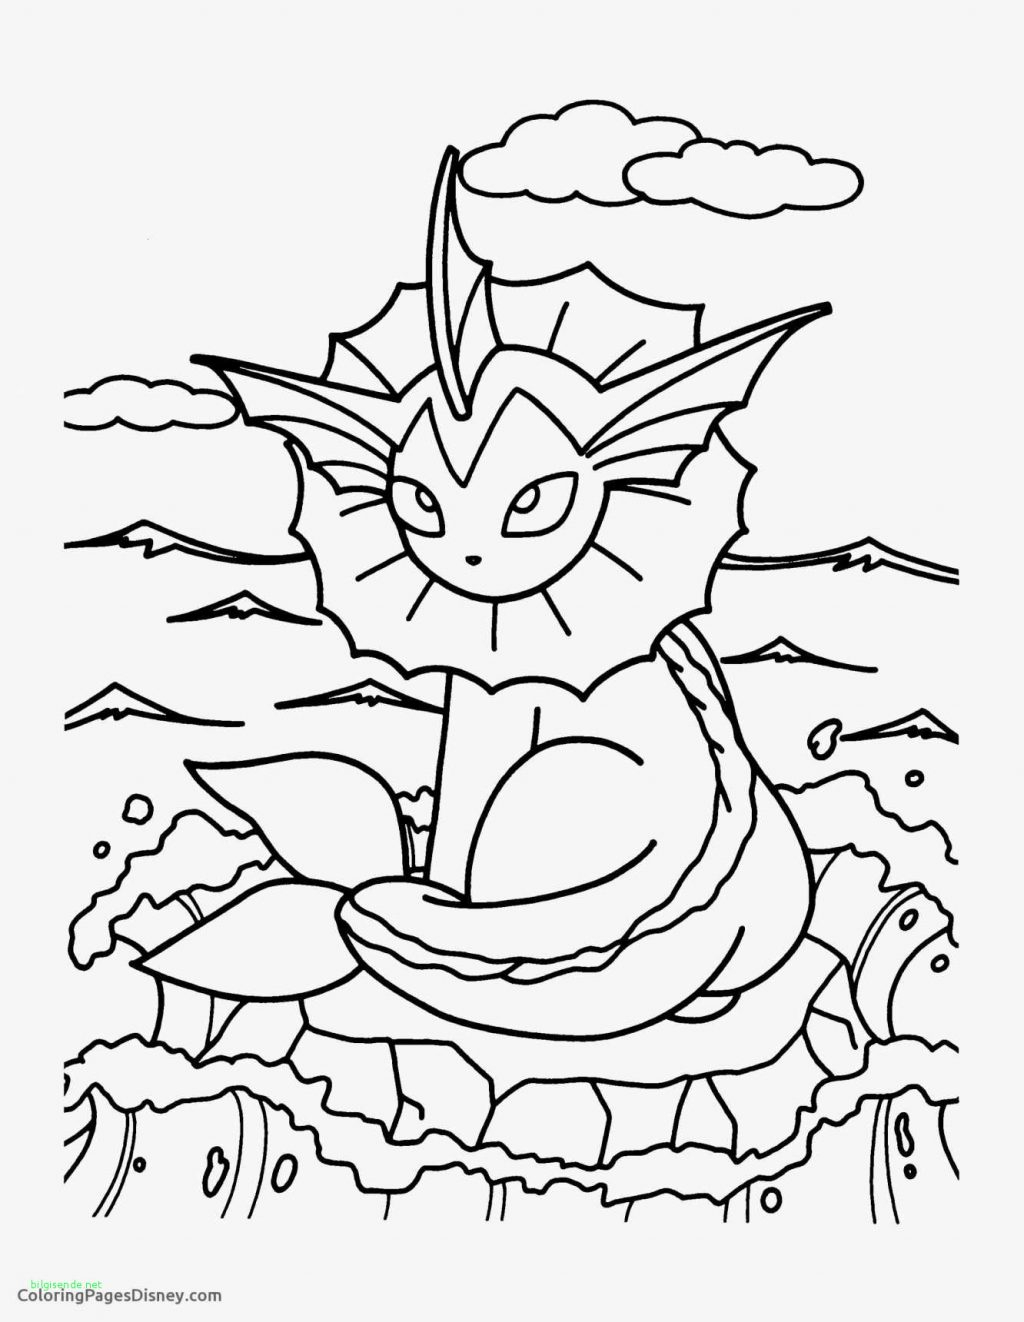 Printables Coloring Pages Coloring Pages Coloring Page Free Disney Pages Online Printables